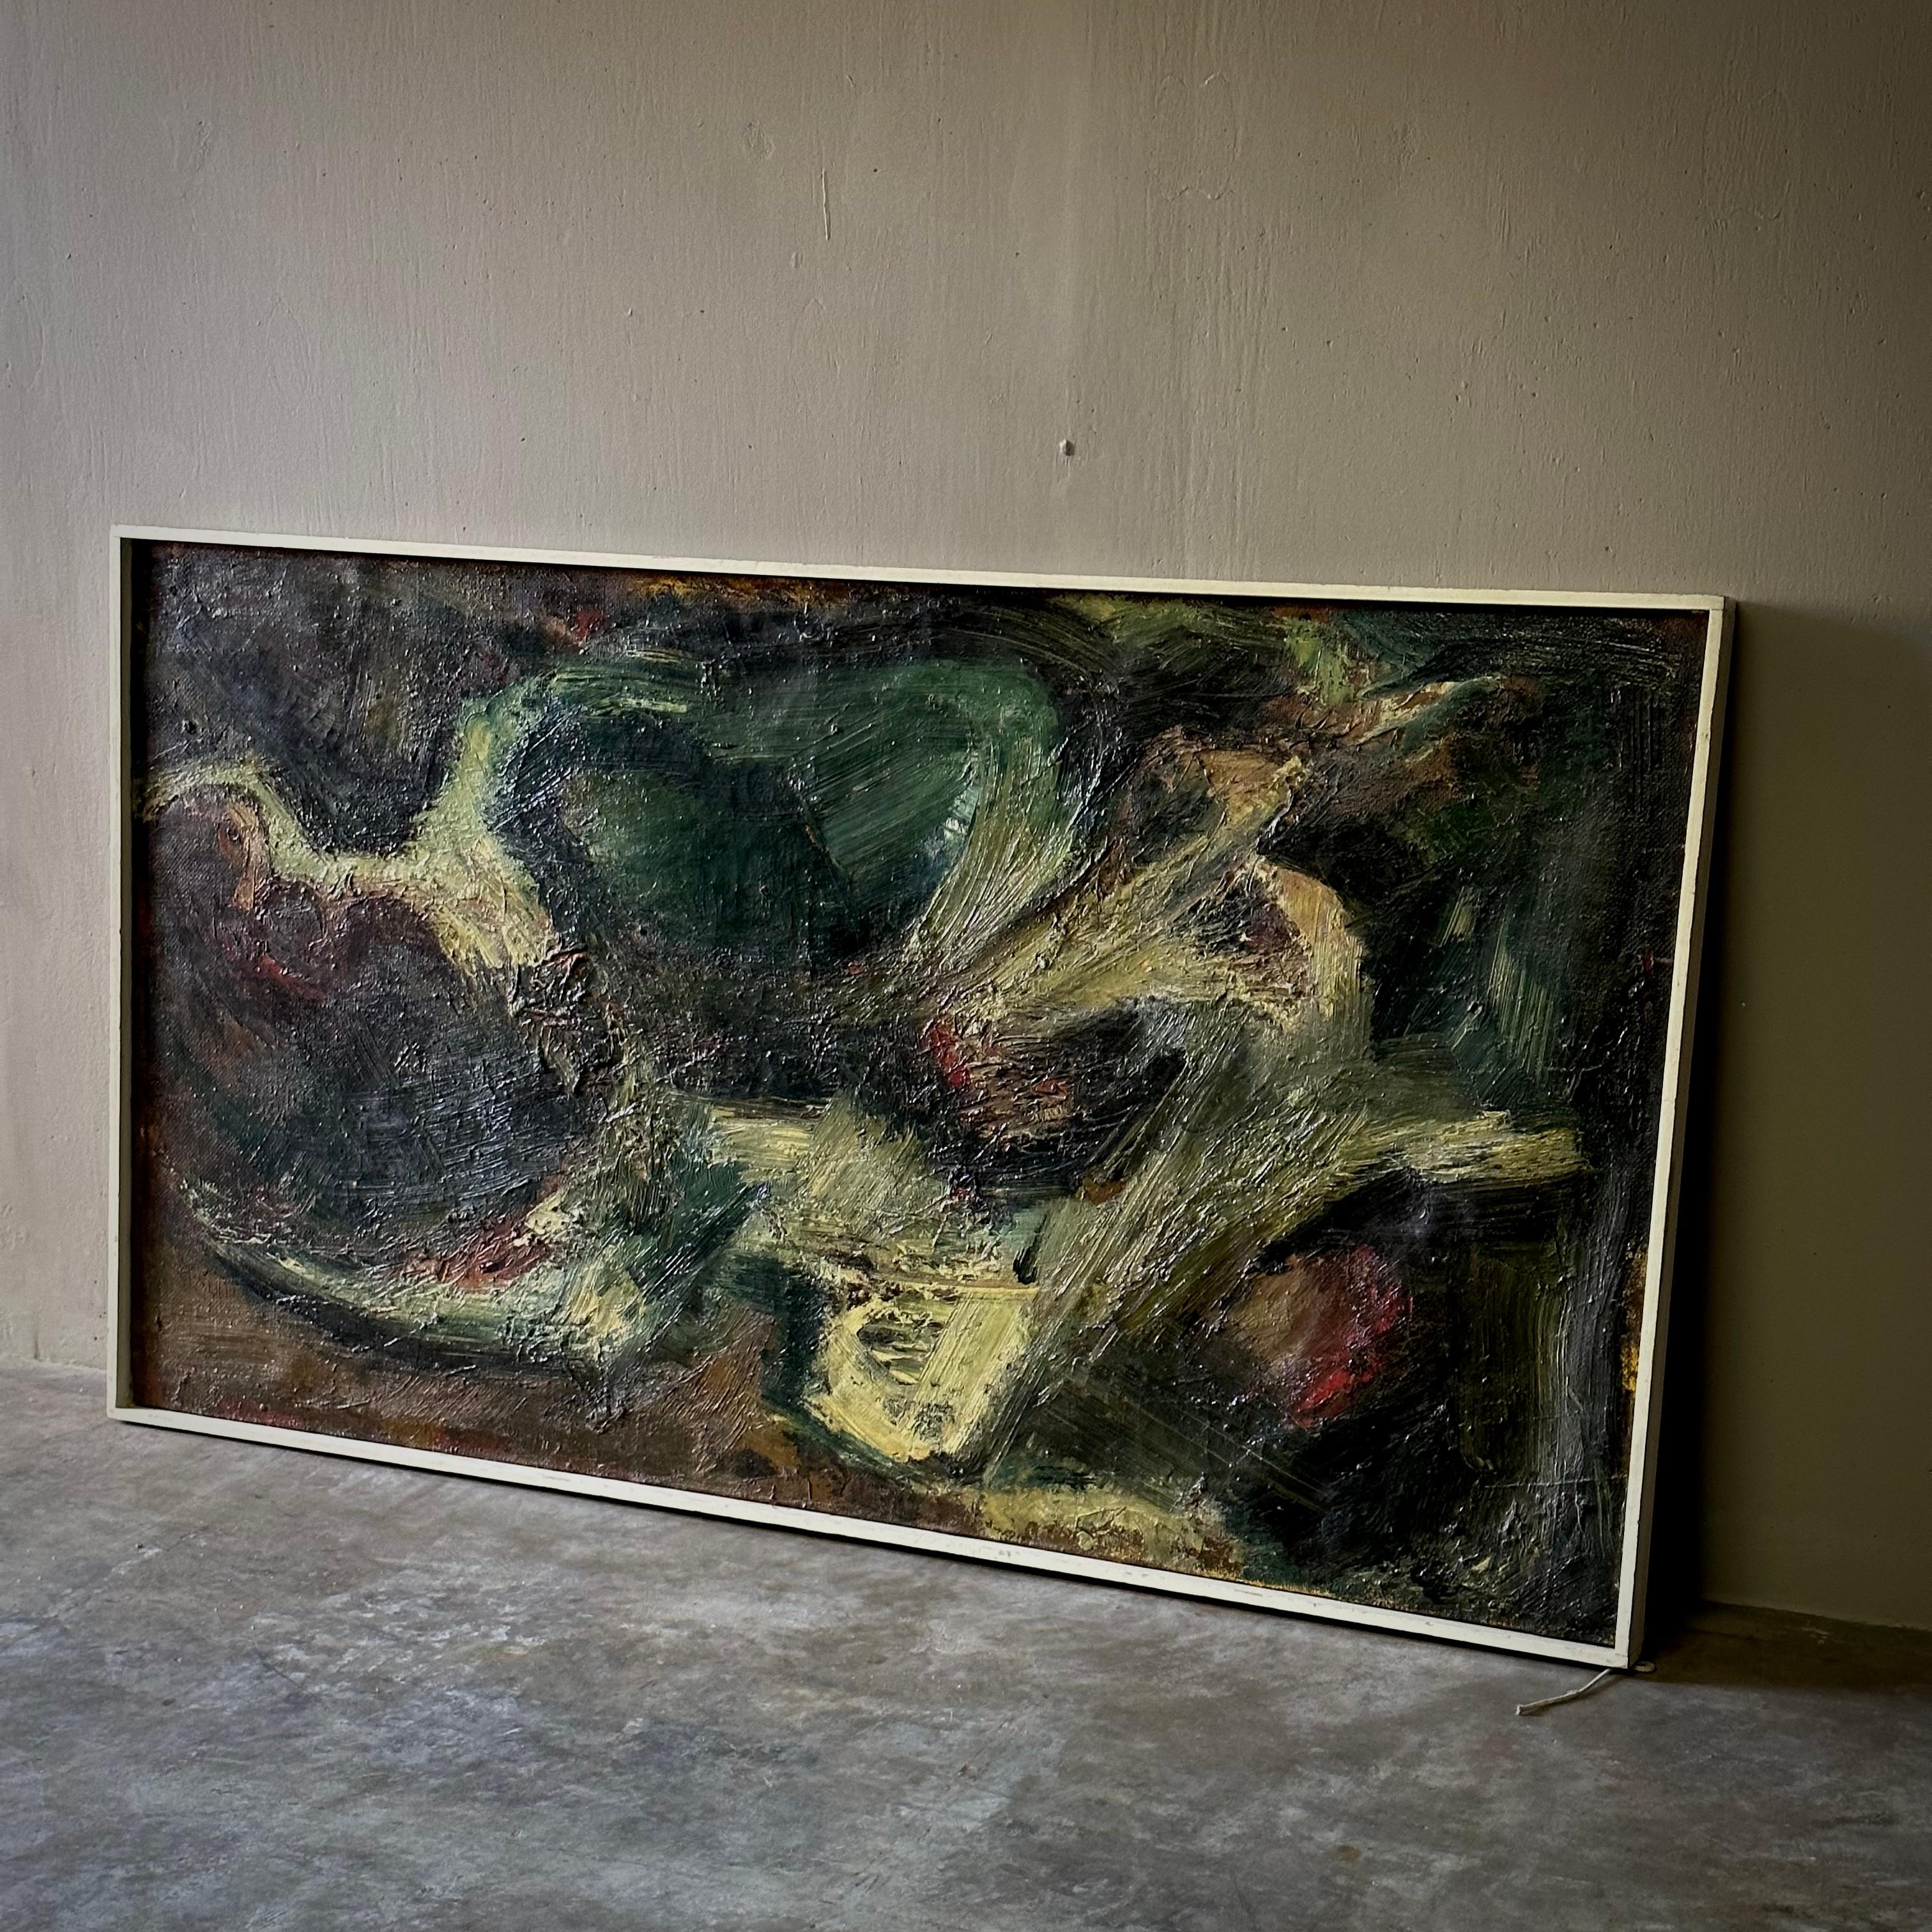 Dutch 1940s unsigned abstract oil painting. Tempestuous and energetic, with a painterly quality related to Chagall and Der Blaue Reiter. A wonderful example of early Dutch Abstract Expressionism with a rich moody color palette of inky blues, creamy